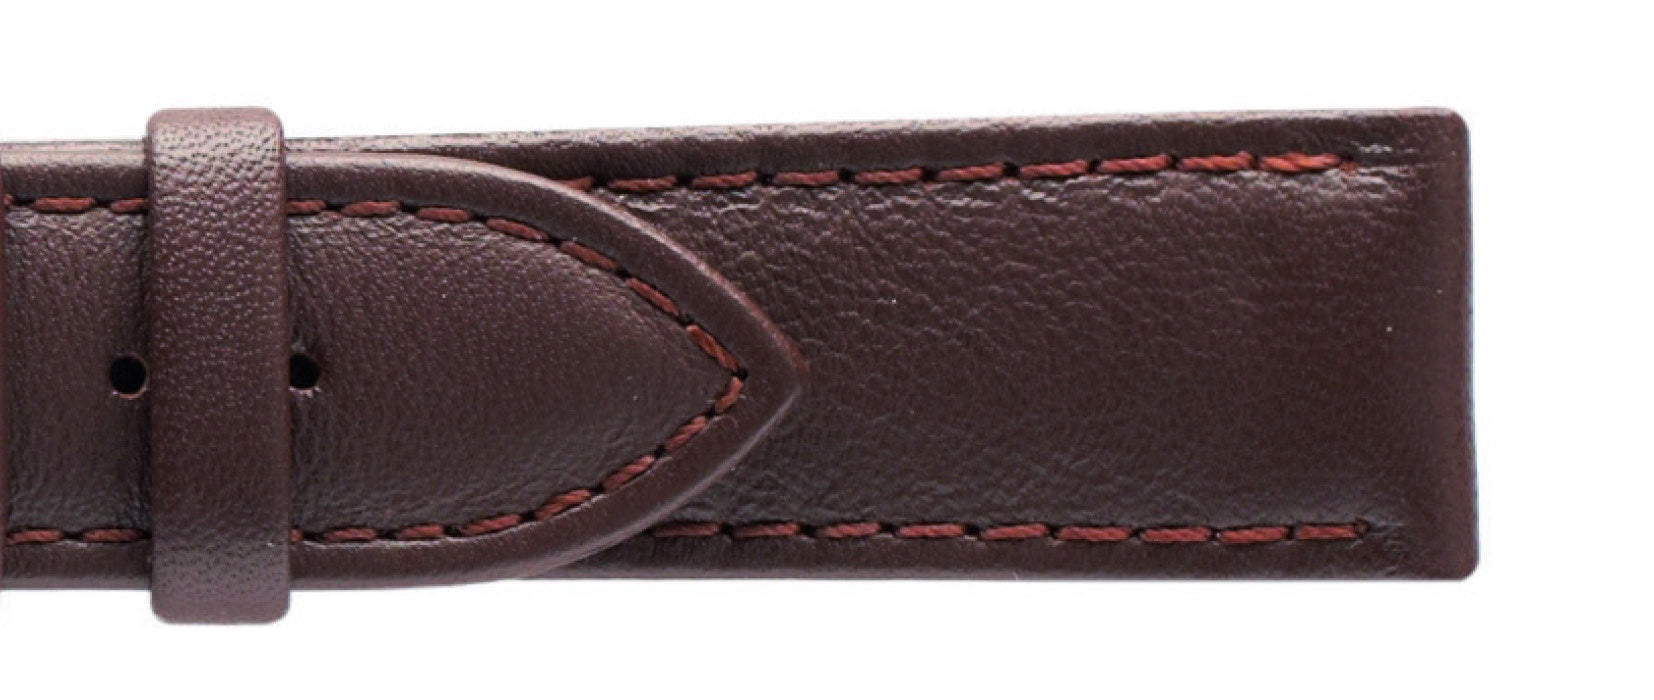 Genuine Calf Leather - Brown